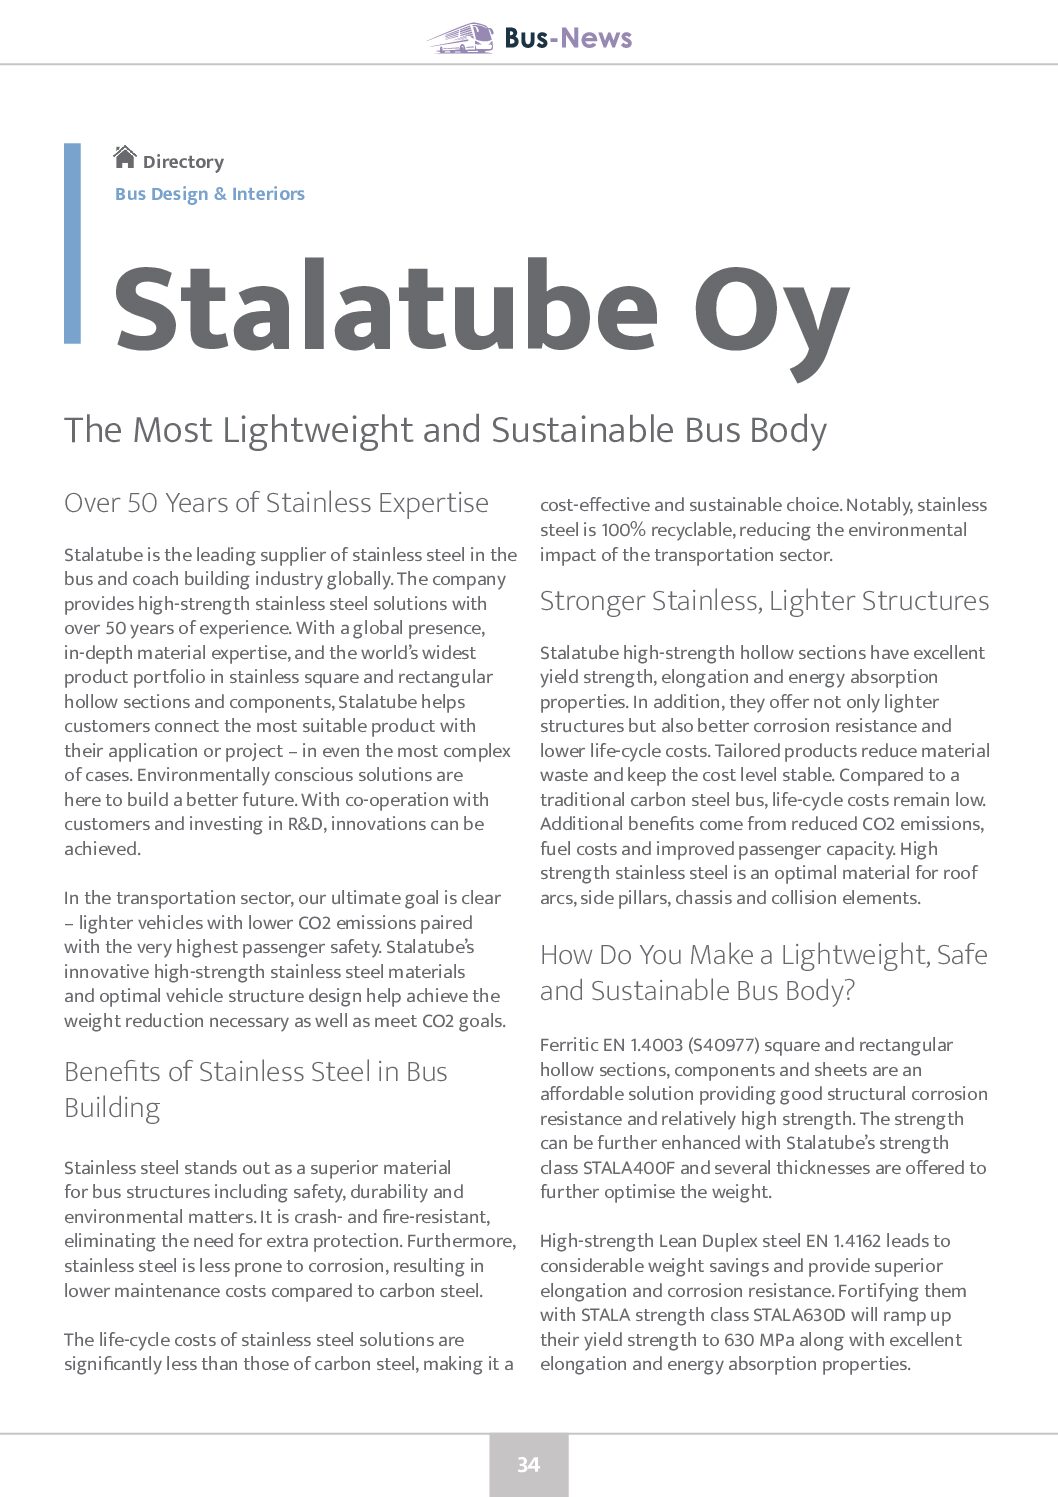 The Most Lightweight and Sustainable Bus Body